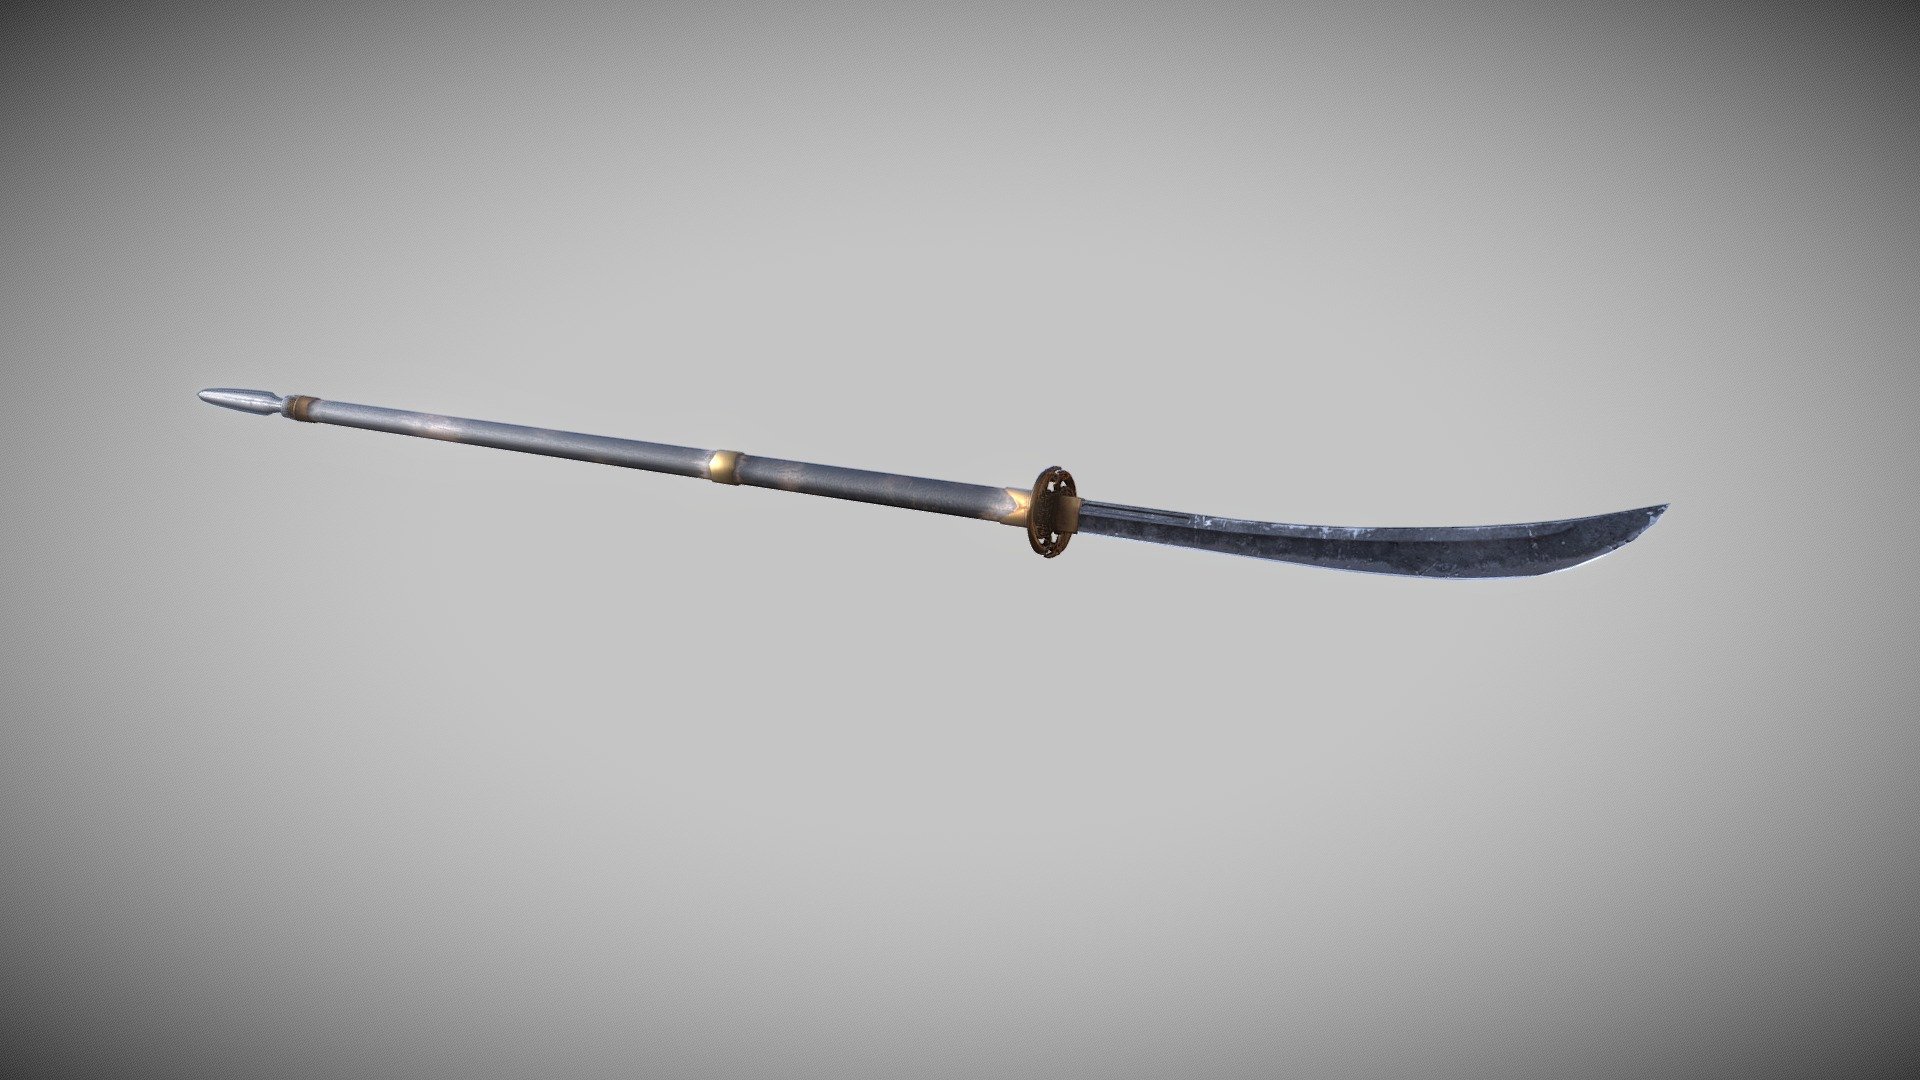 Game Ready Naginata Spear

Modeled and textured in Blender 3.3
Only modeled in Quads (14500 Tris) - Naginata (Japanese Spear) - 3D model by RSArts 3d model